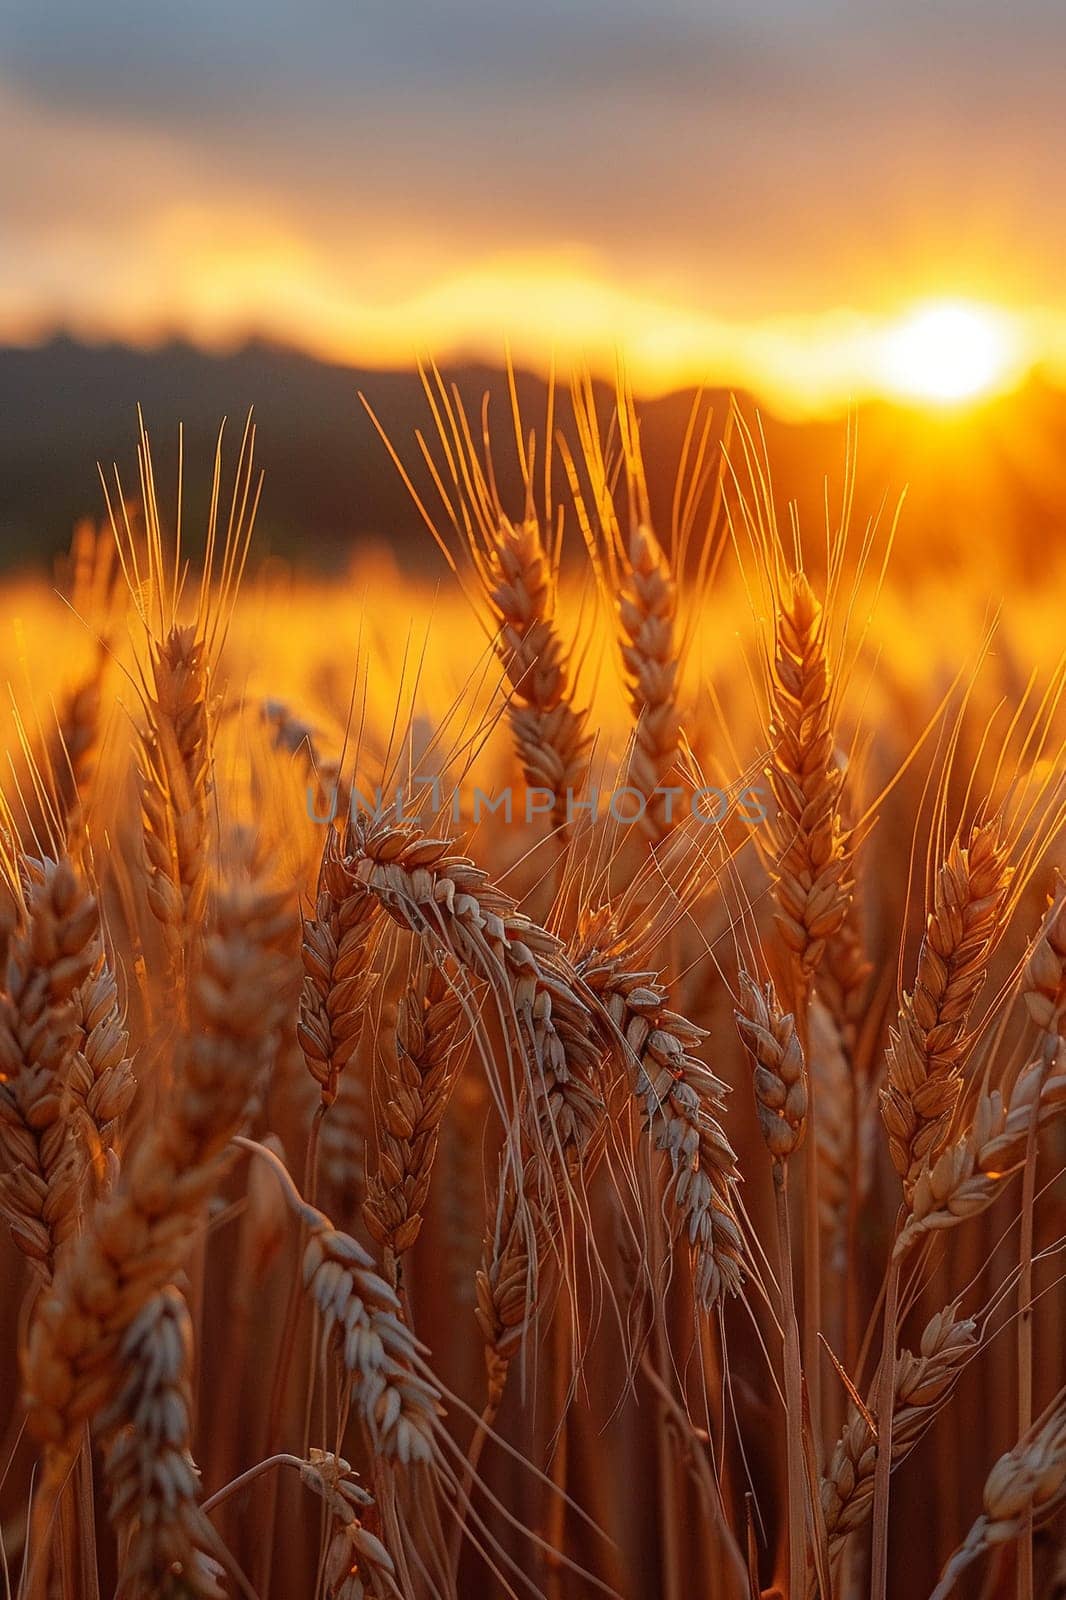 Golden Hour Over a Field of Wheat Ready for the Harvest The light blurs with the grain by Benzoix